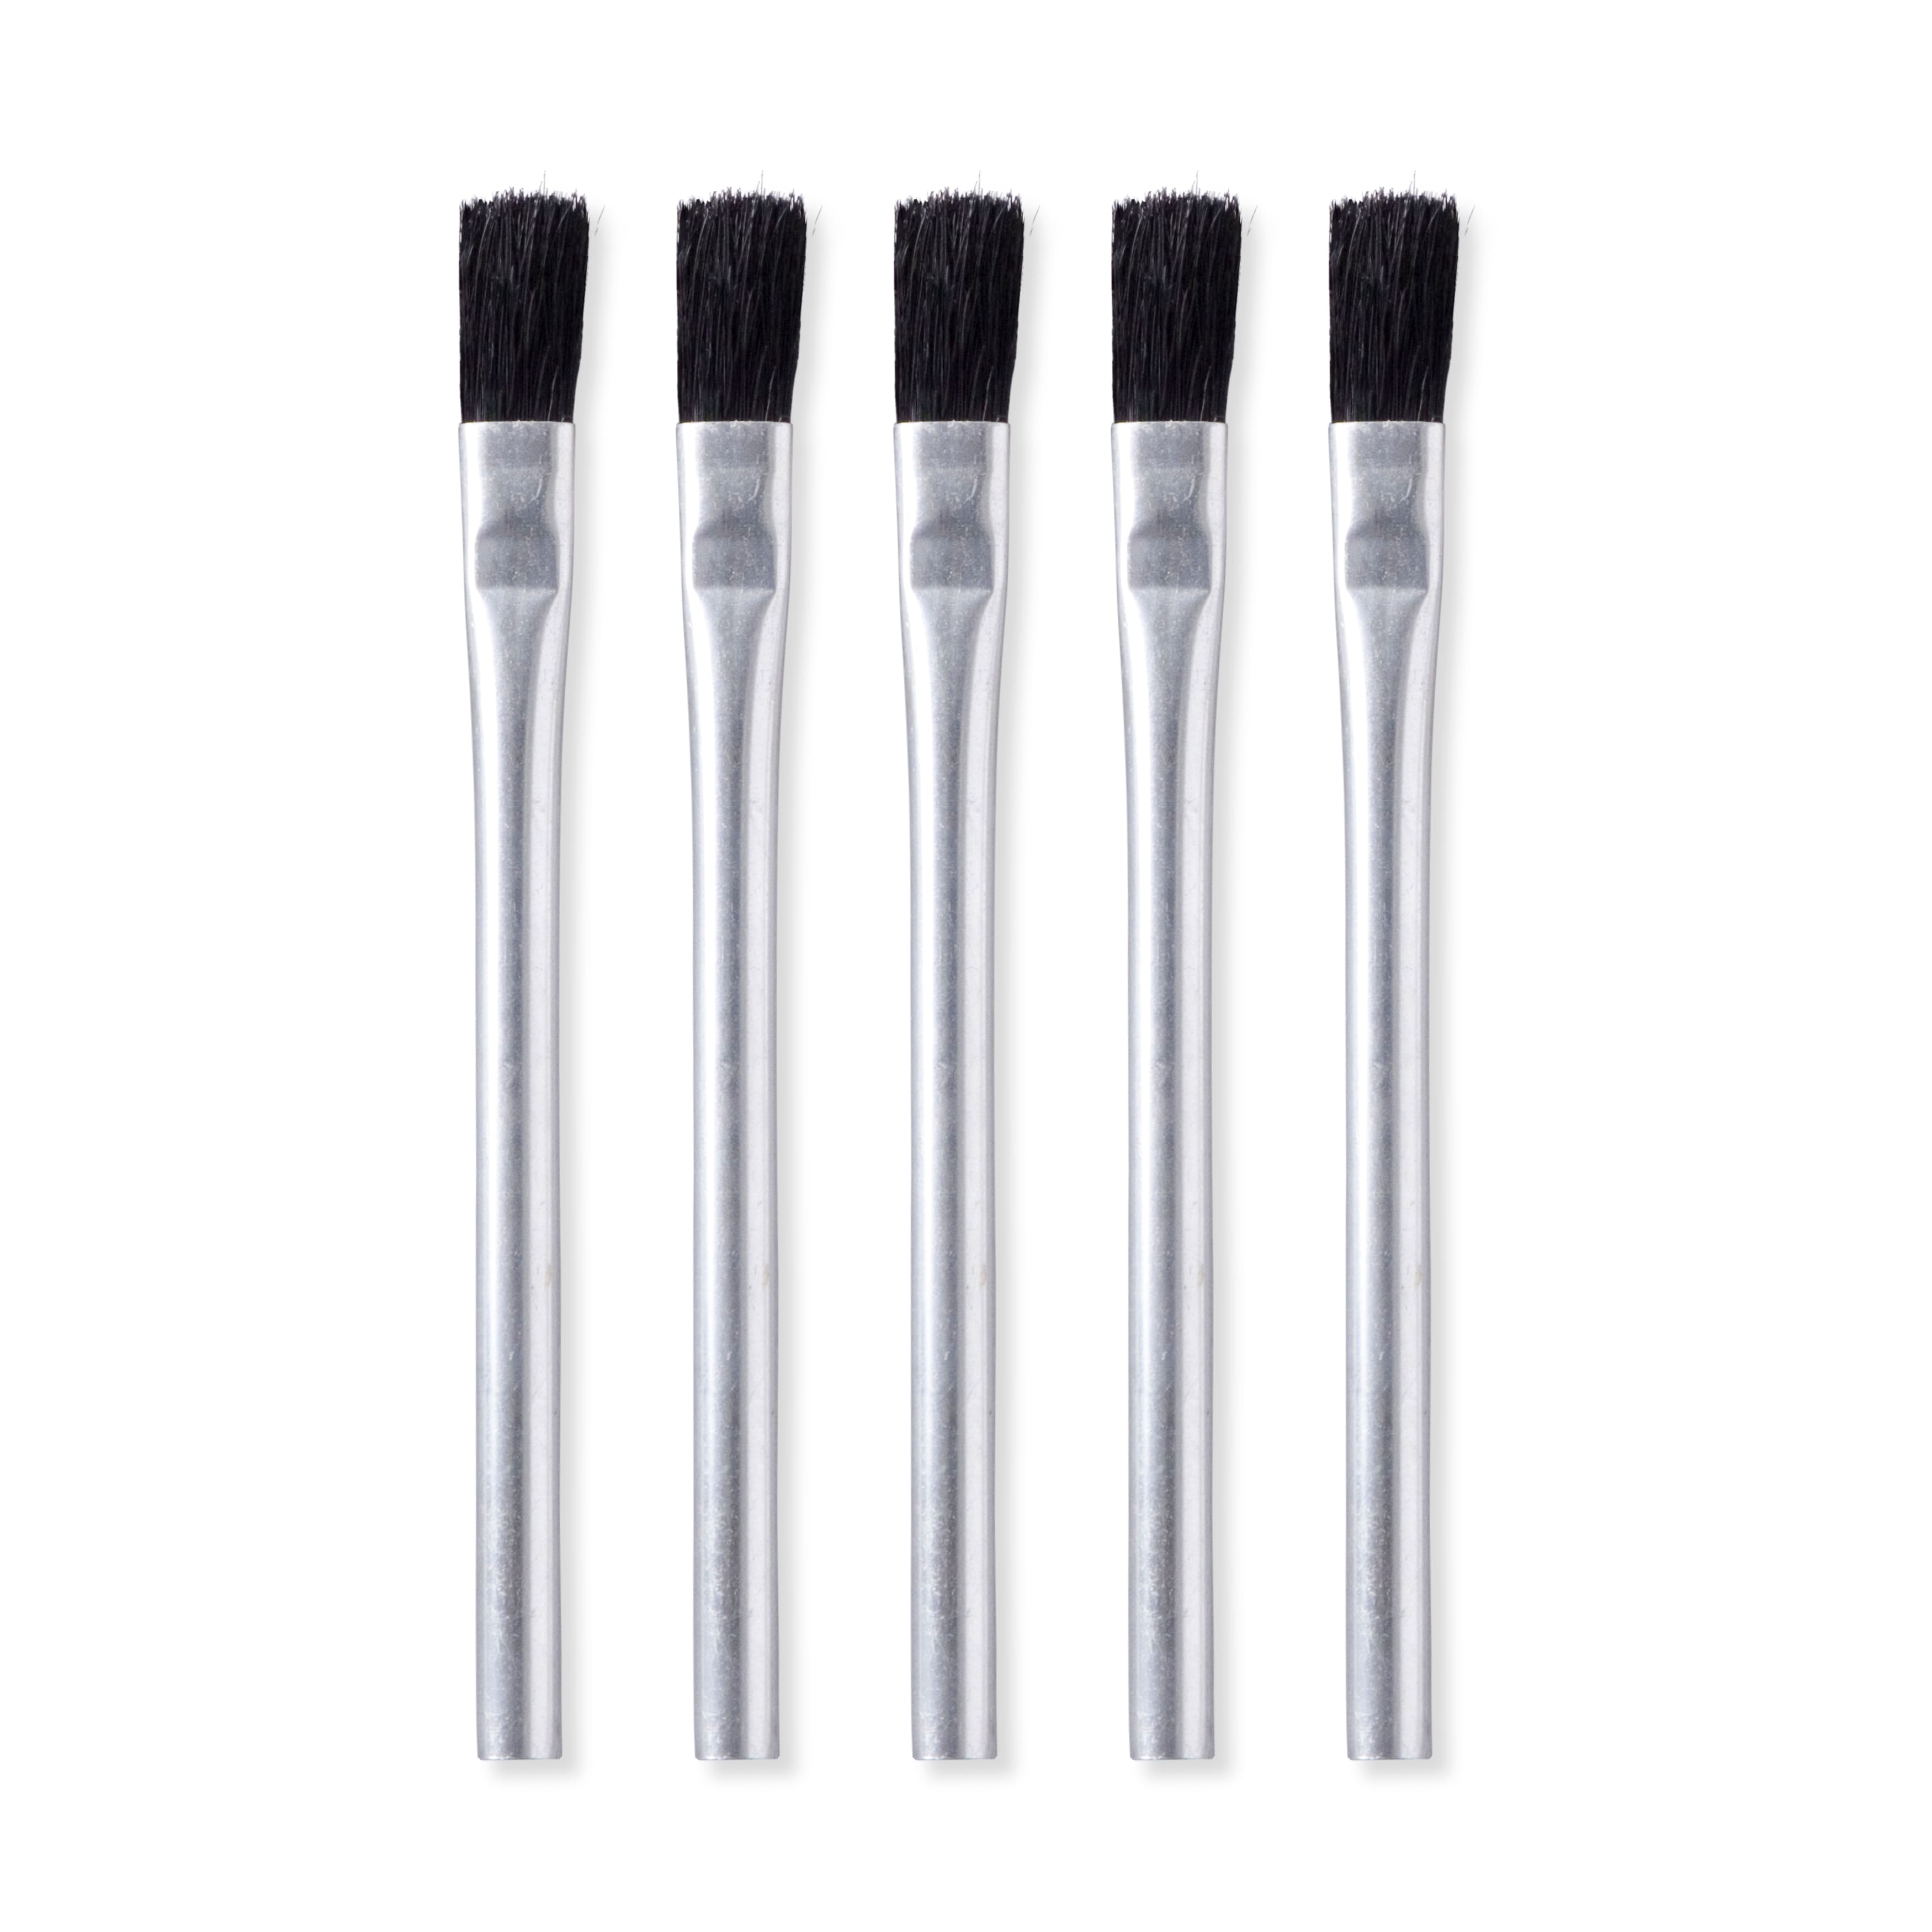 12 pc. Disposable Acid Brush for Craft,Glue,Epoxy,Paint,Flux brush and more